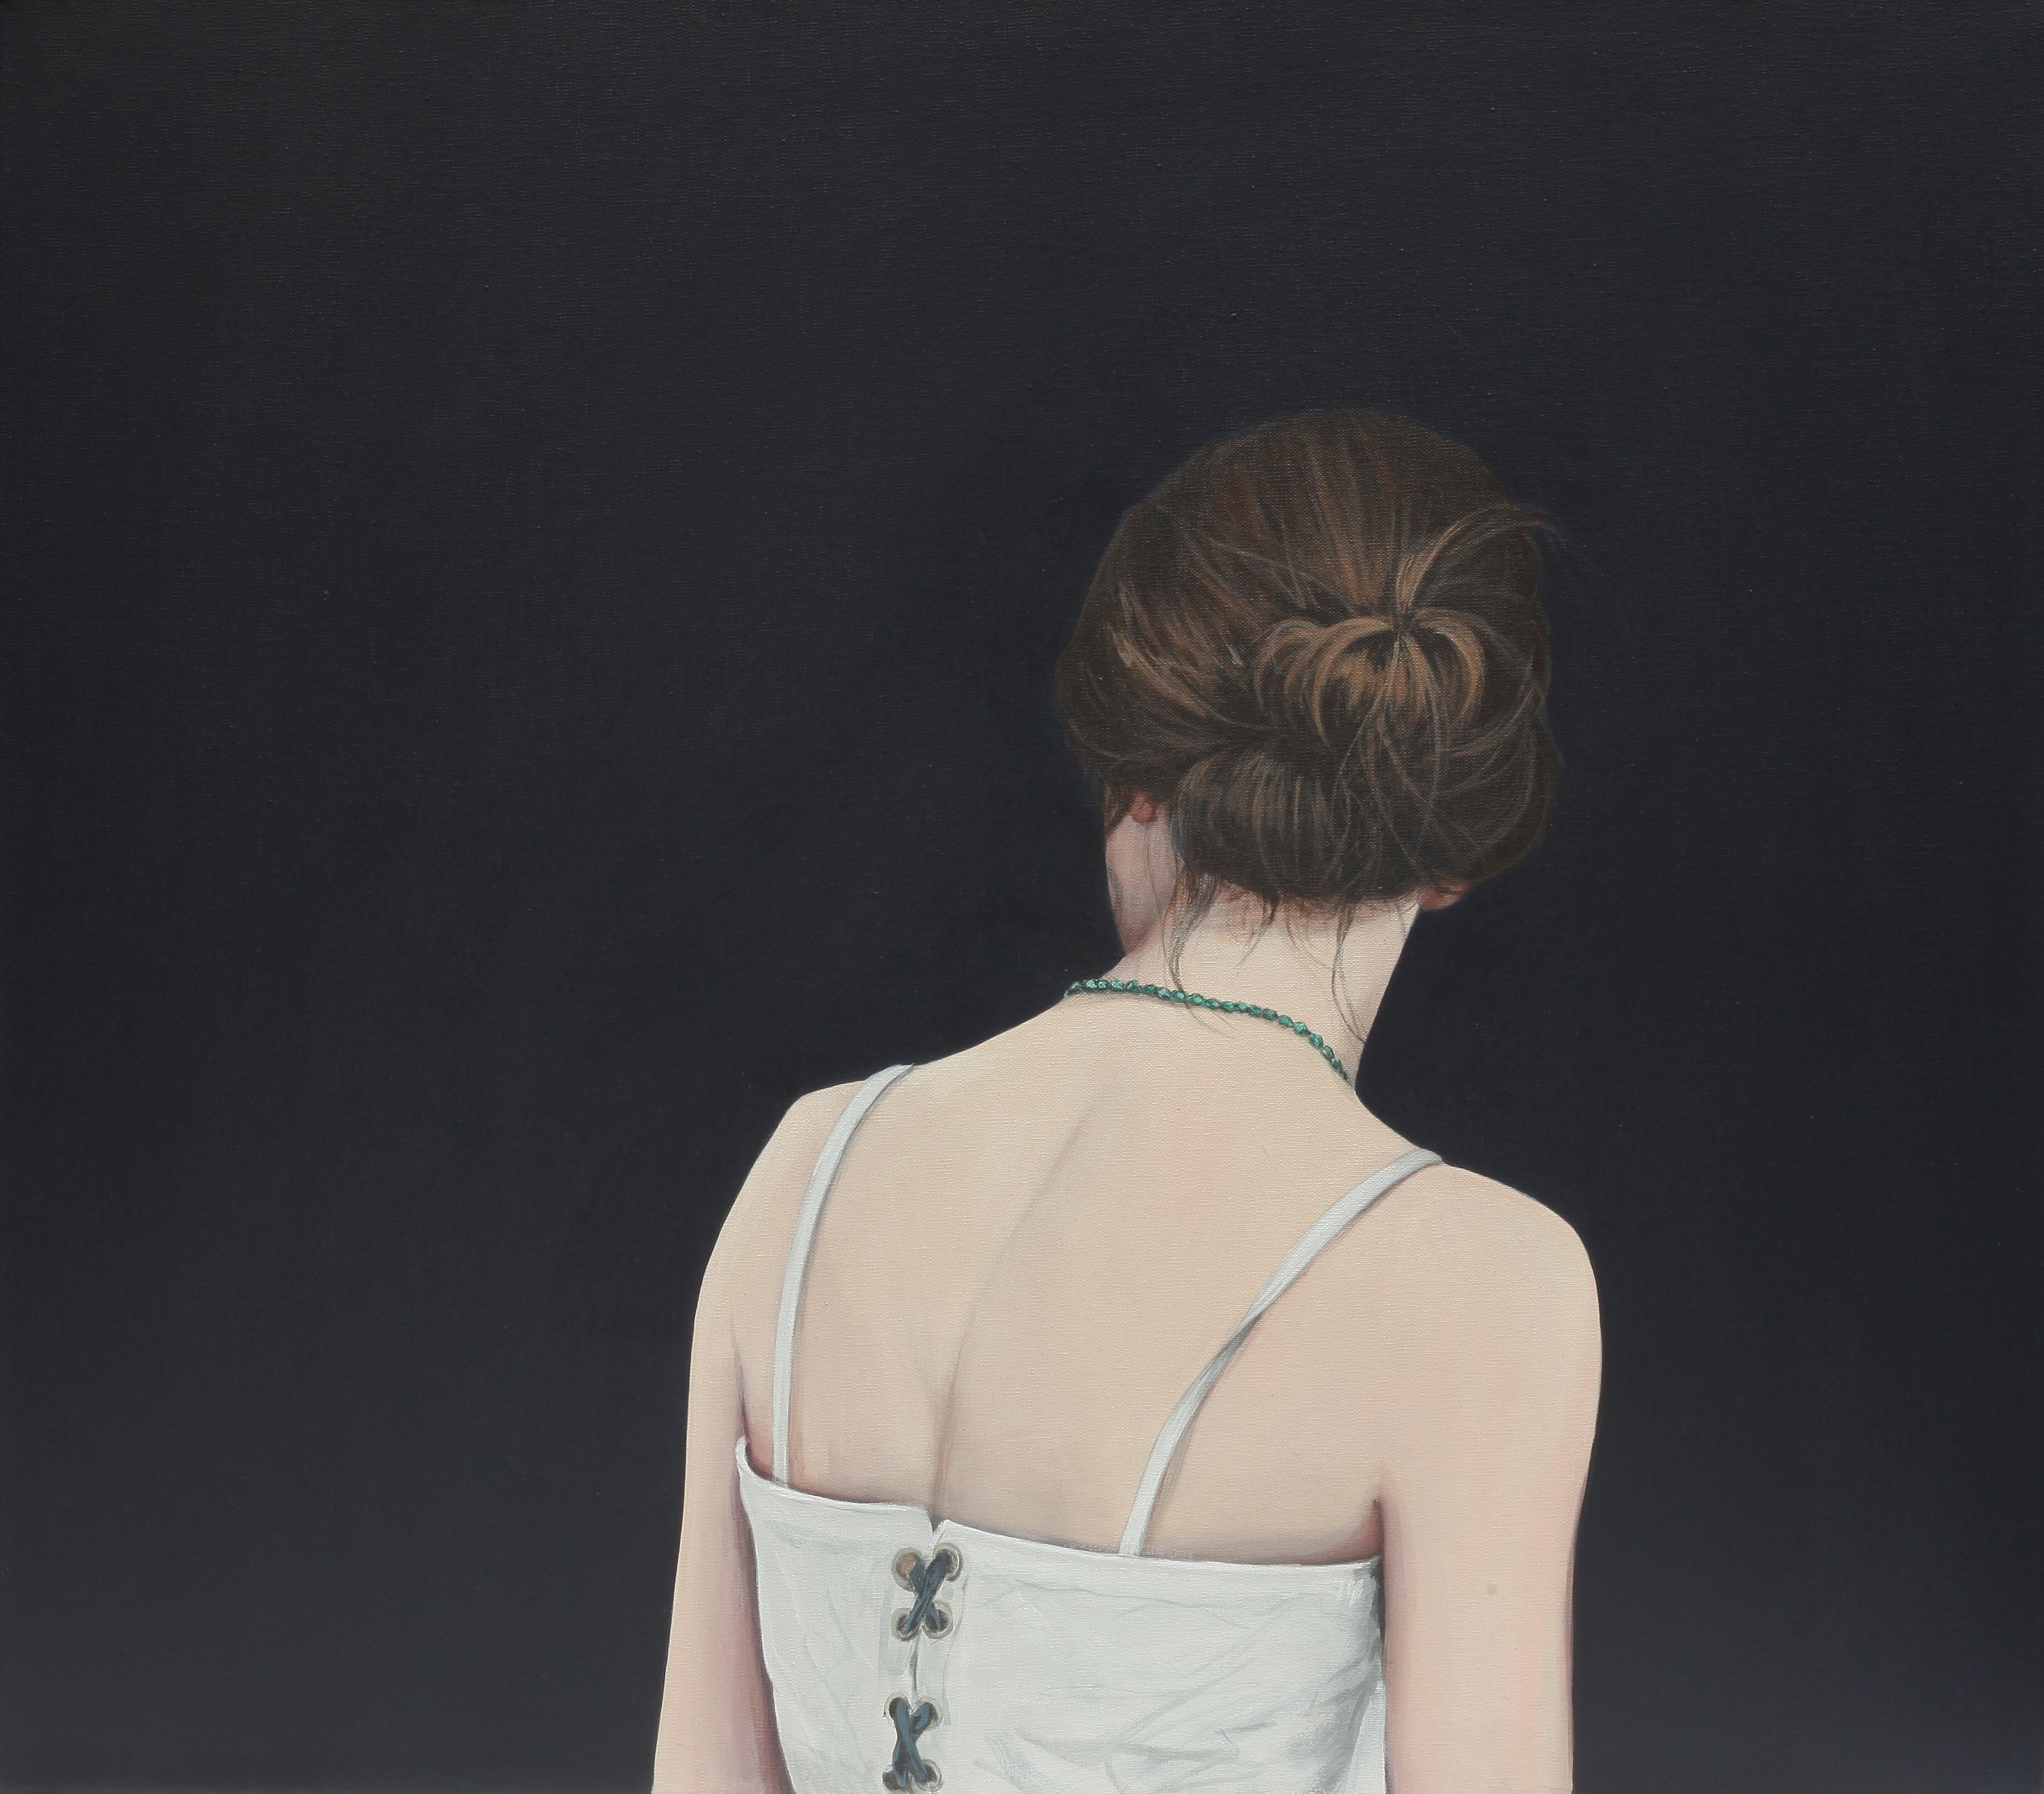 Karoline Kroiss Figurative Painting - Contemporary Portrait of a Girl with Bun and White Top on Black Background